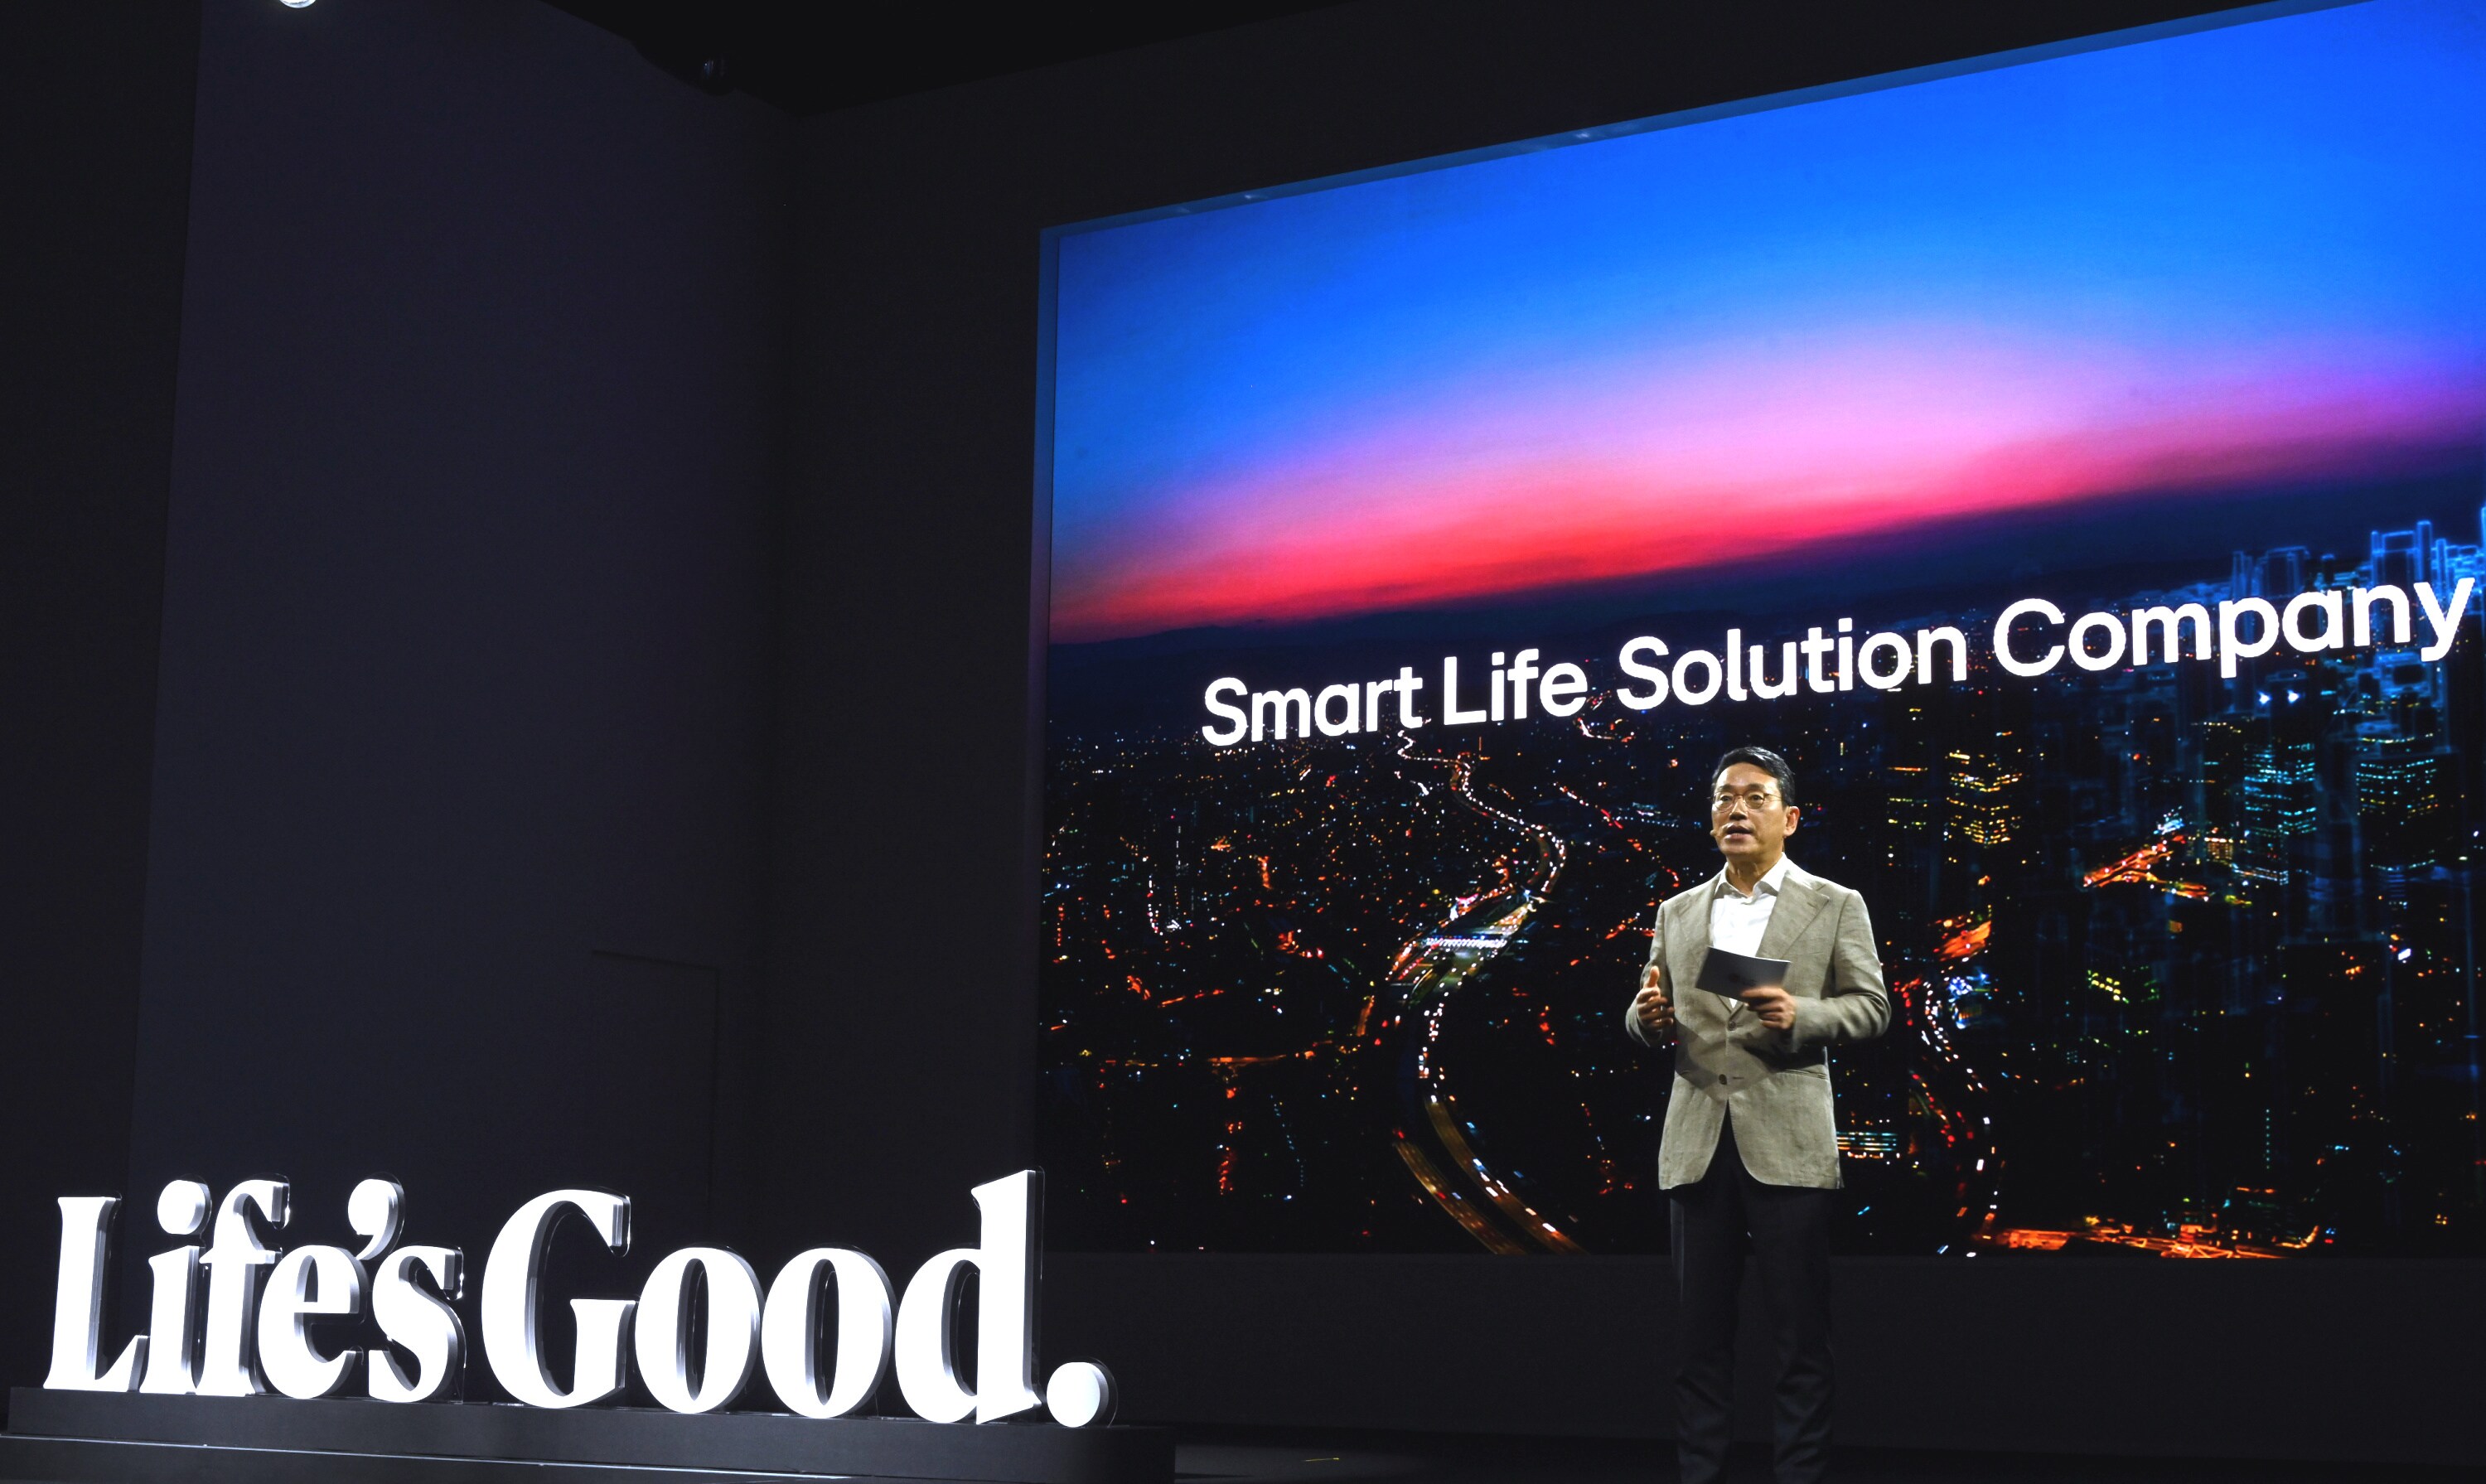 LG CEO Announces Bold Vision to Transform LG Into ‘Smart Life Solutions Company’